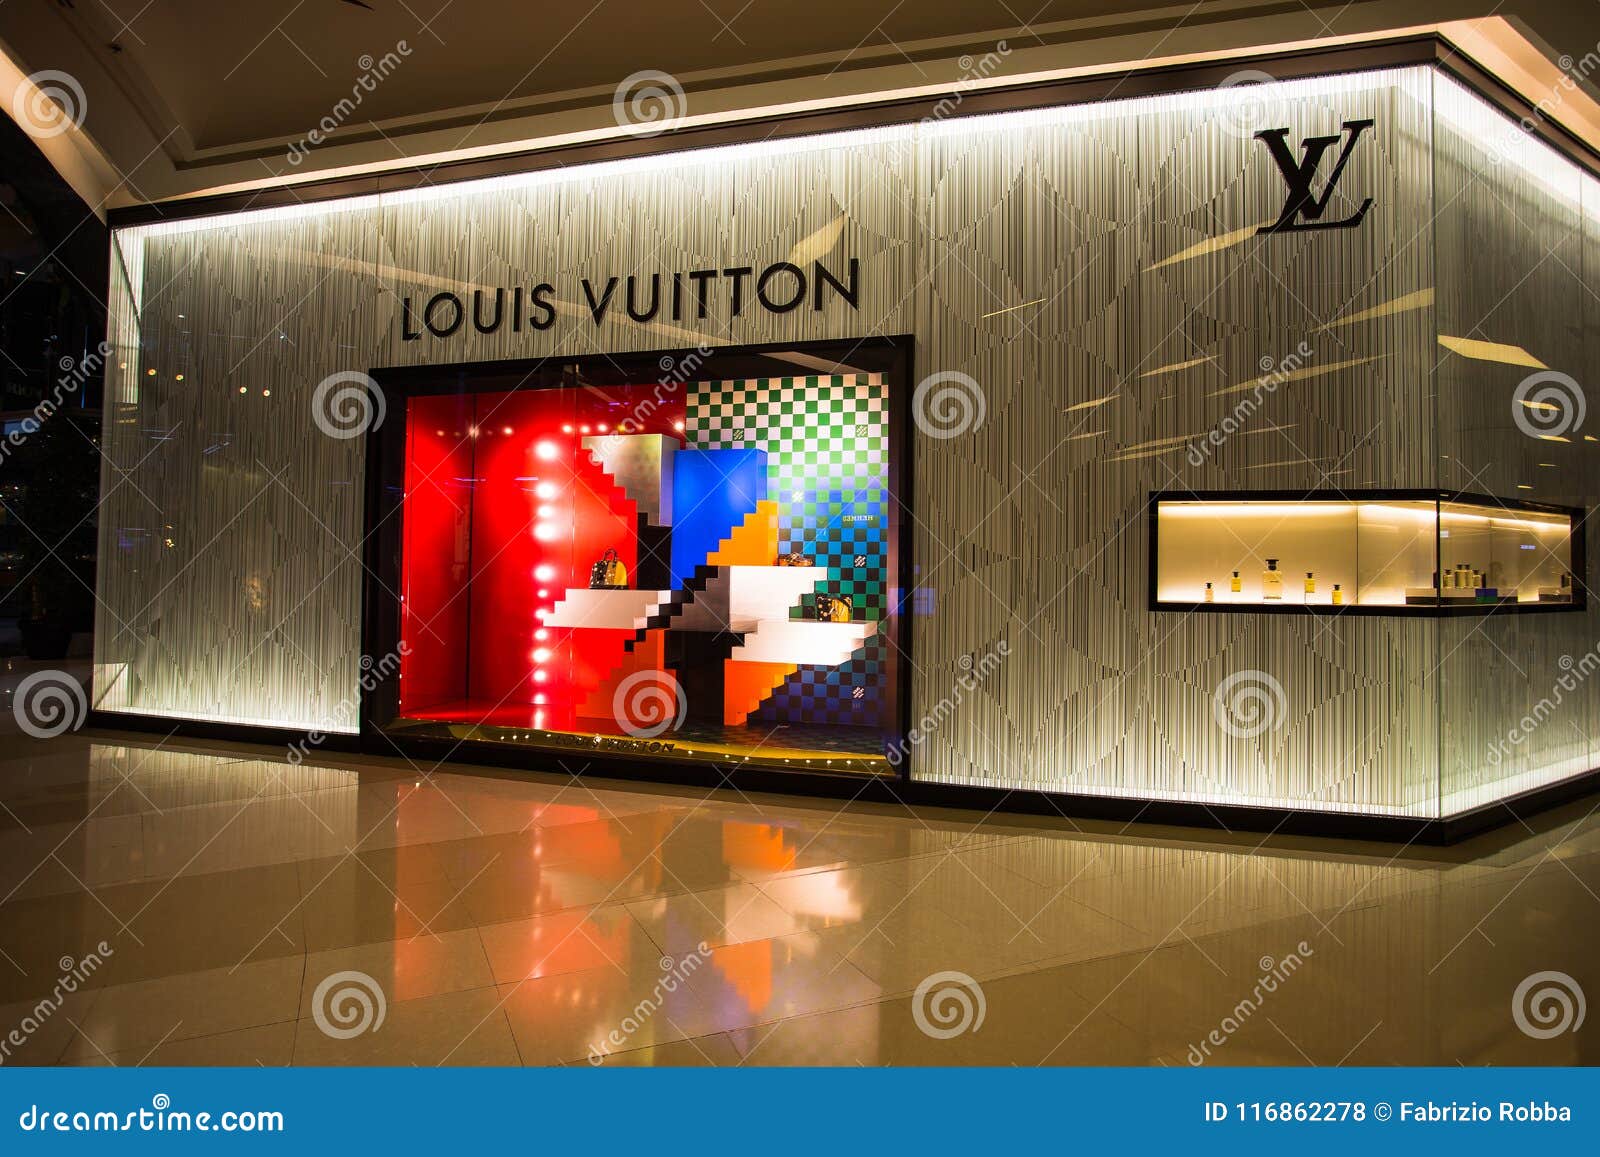 Louis Vuitton-opslag In Siam Paragon Mall In Bangkok, Thailand Redactionele Stock Foto ...